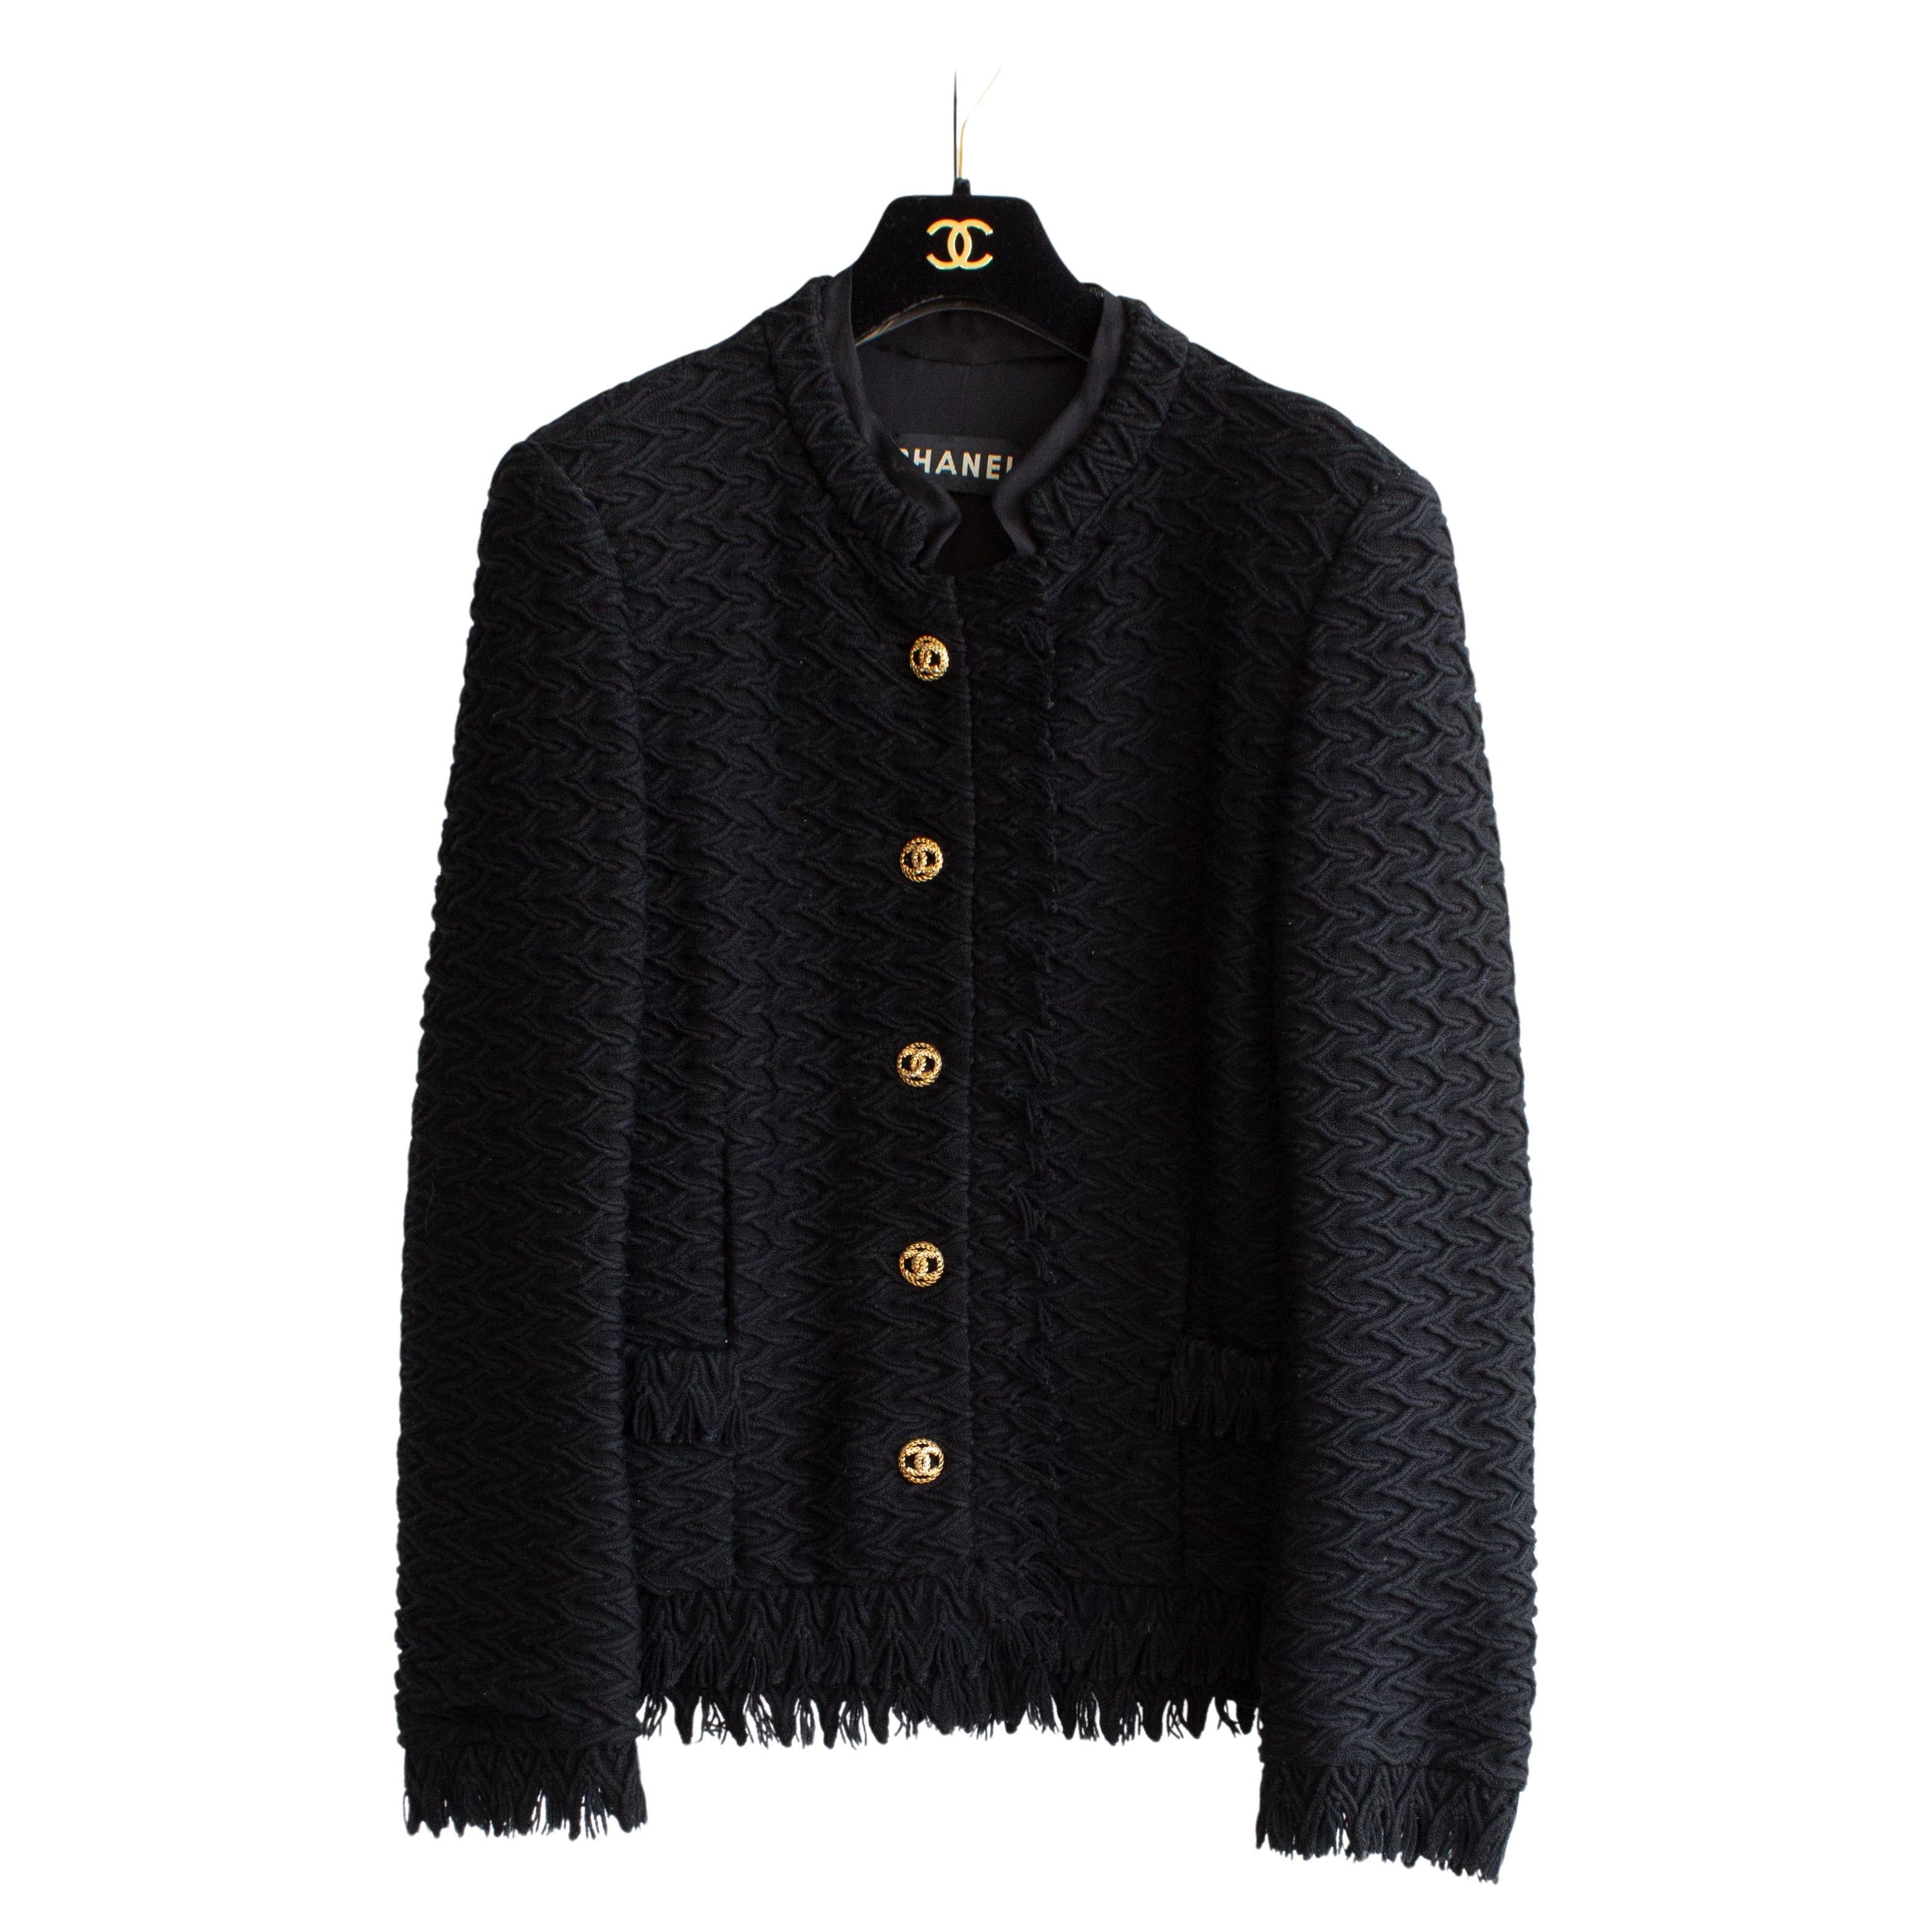 Rare Chanel Haute Couture F/W 1970 Jackie Black Gold CC Fringe LBJ Tweed Jacket For Sale